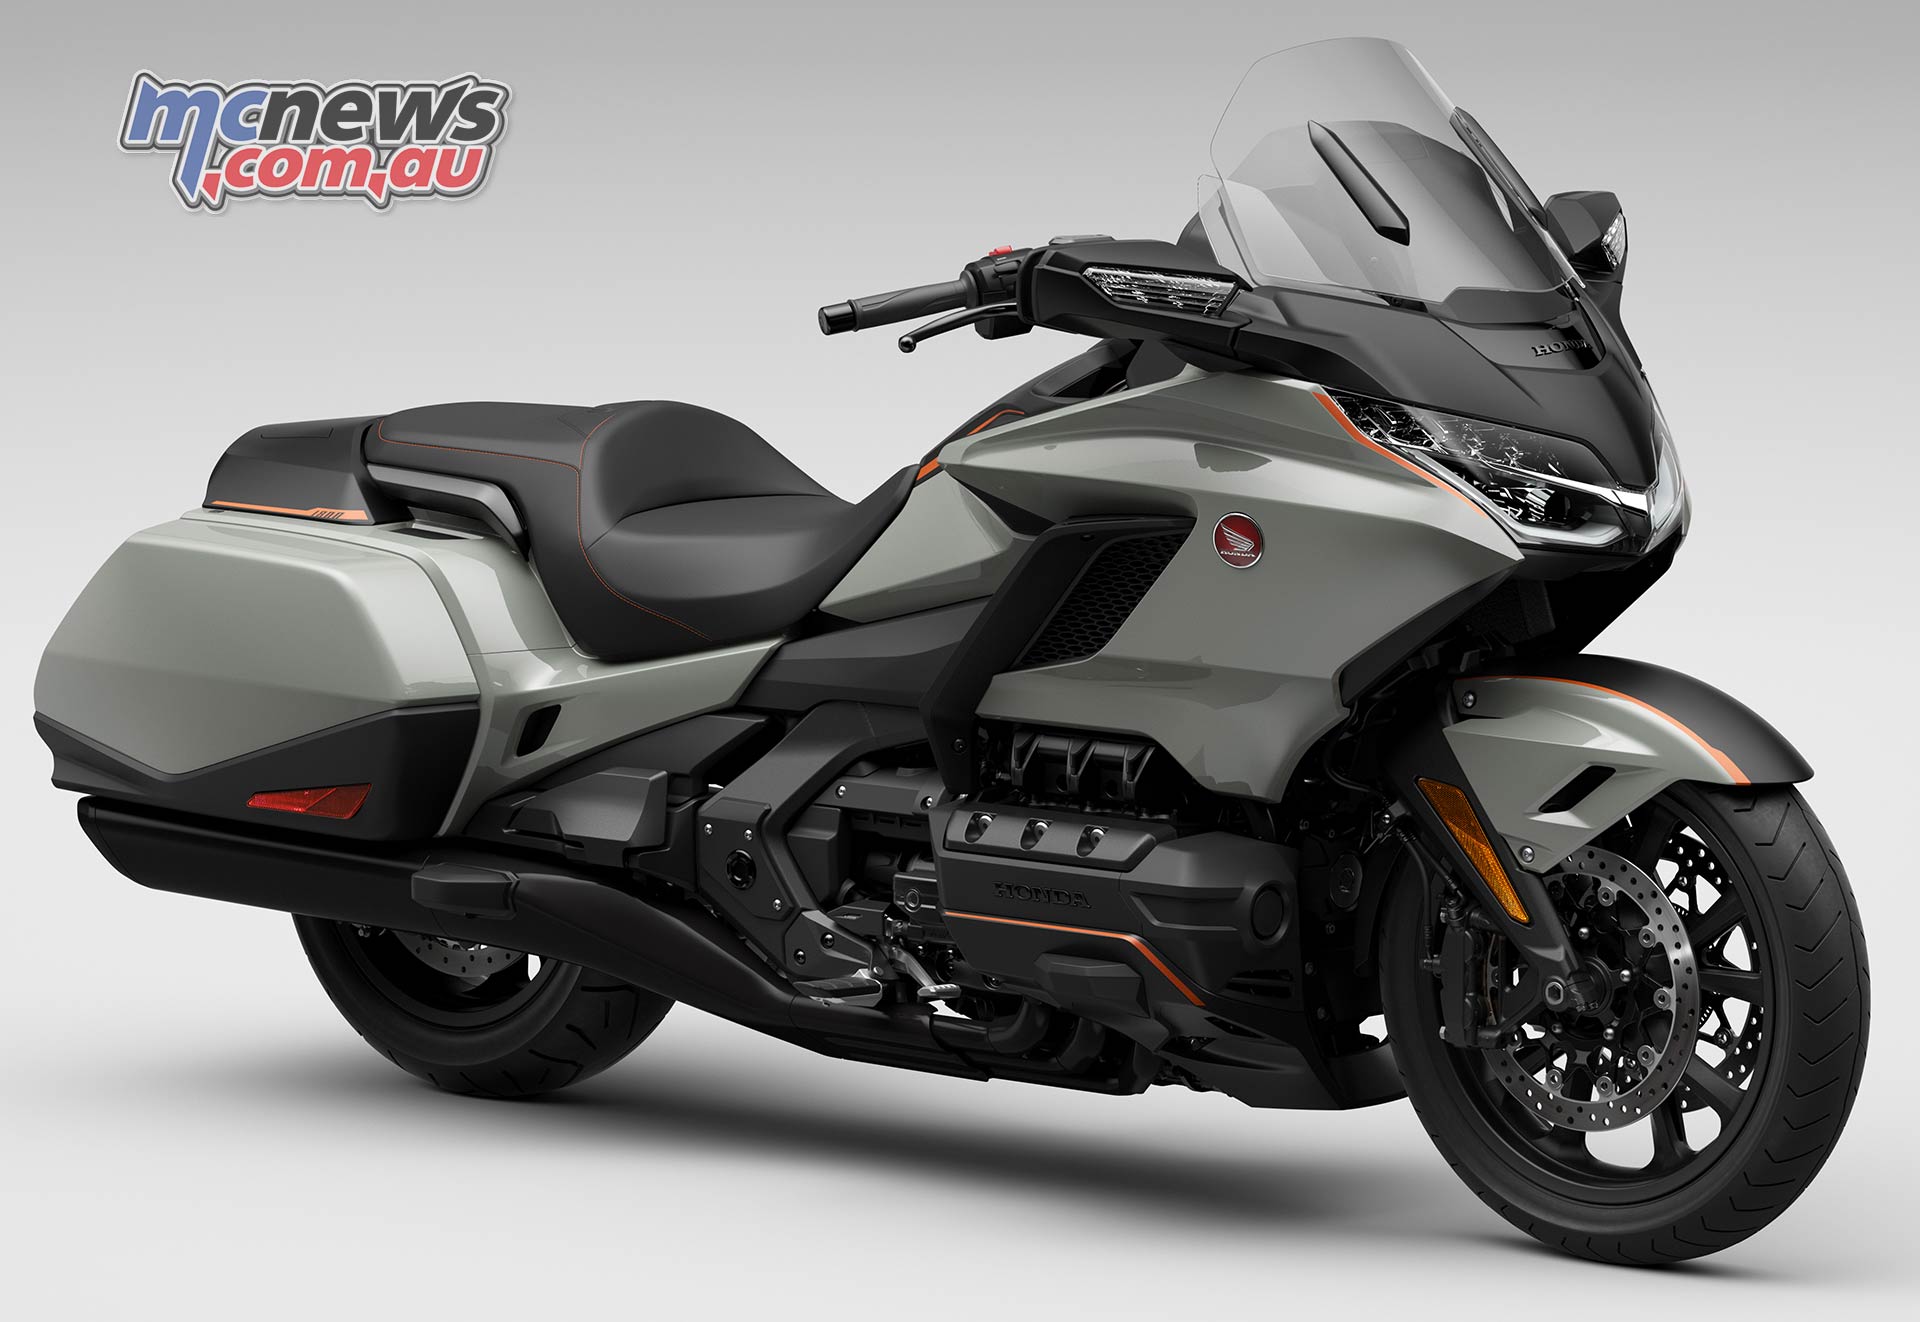 Gold Wing gets audio and seat upgrade for 2021 | MCNews